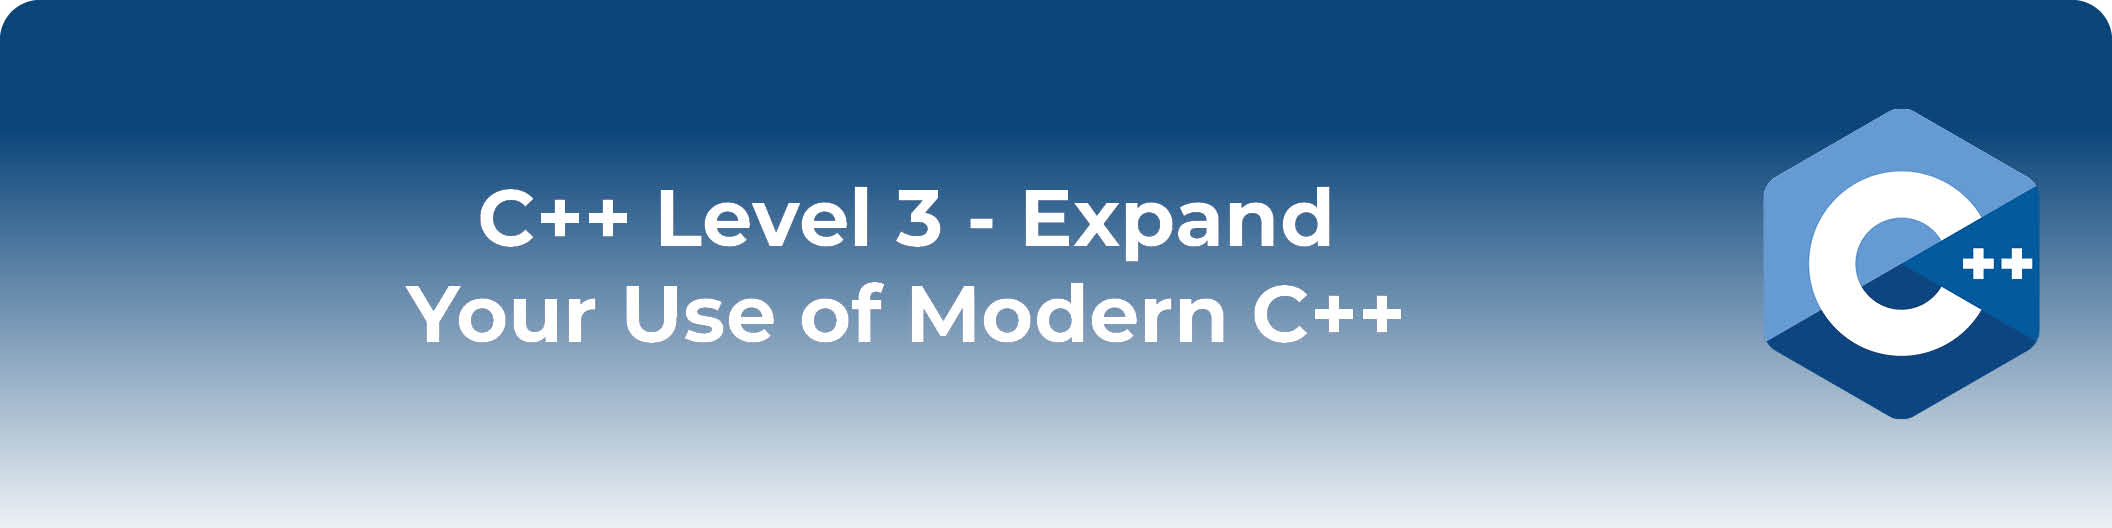 C++ Level 3 - Expand Your Use of Modern C++